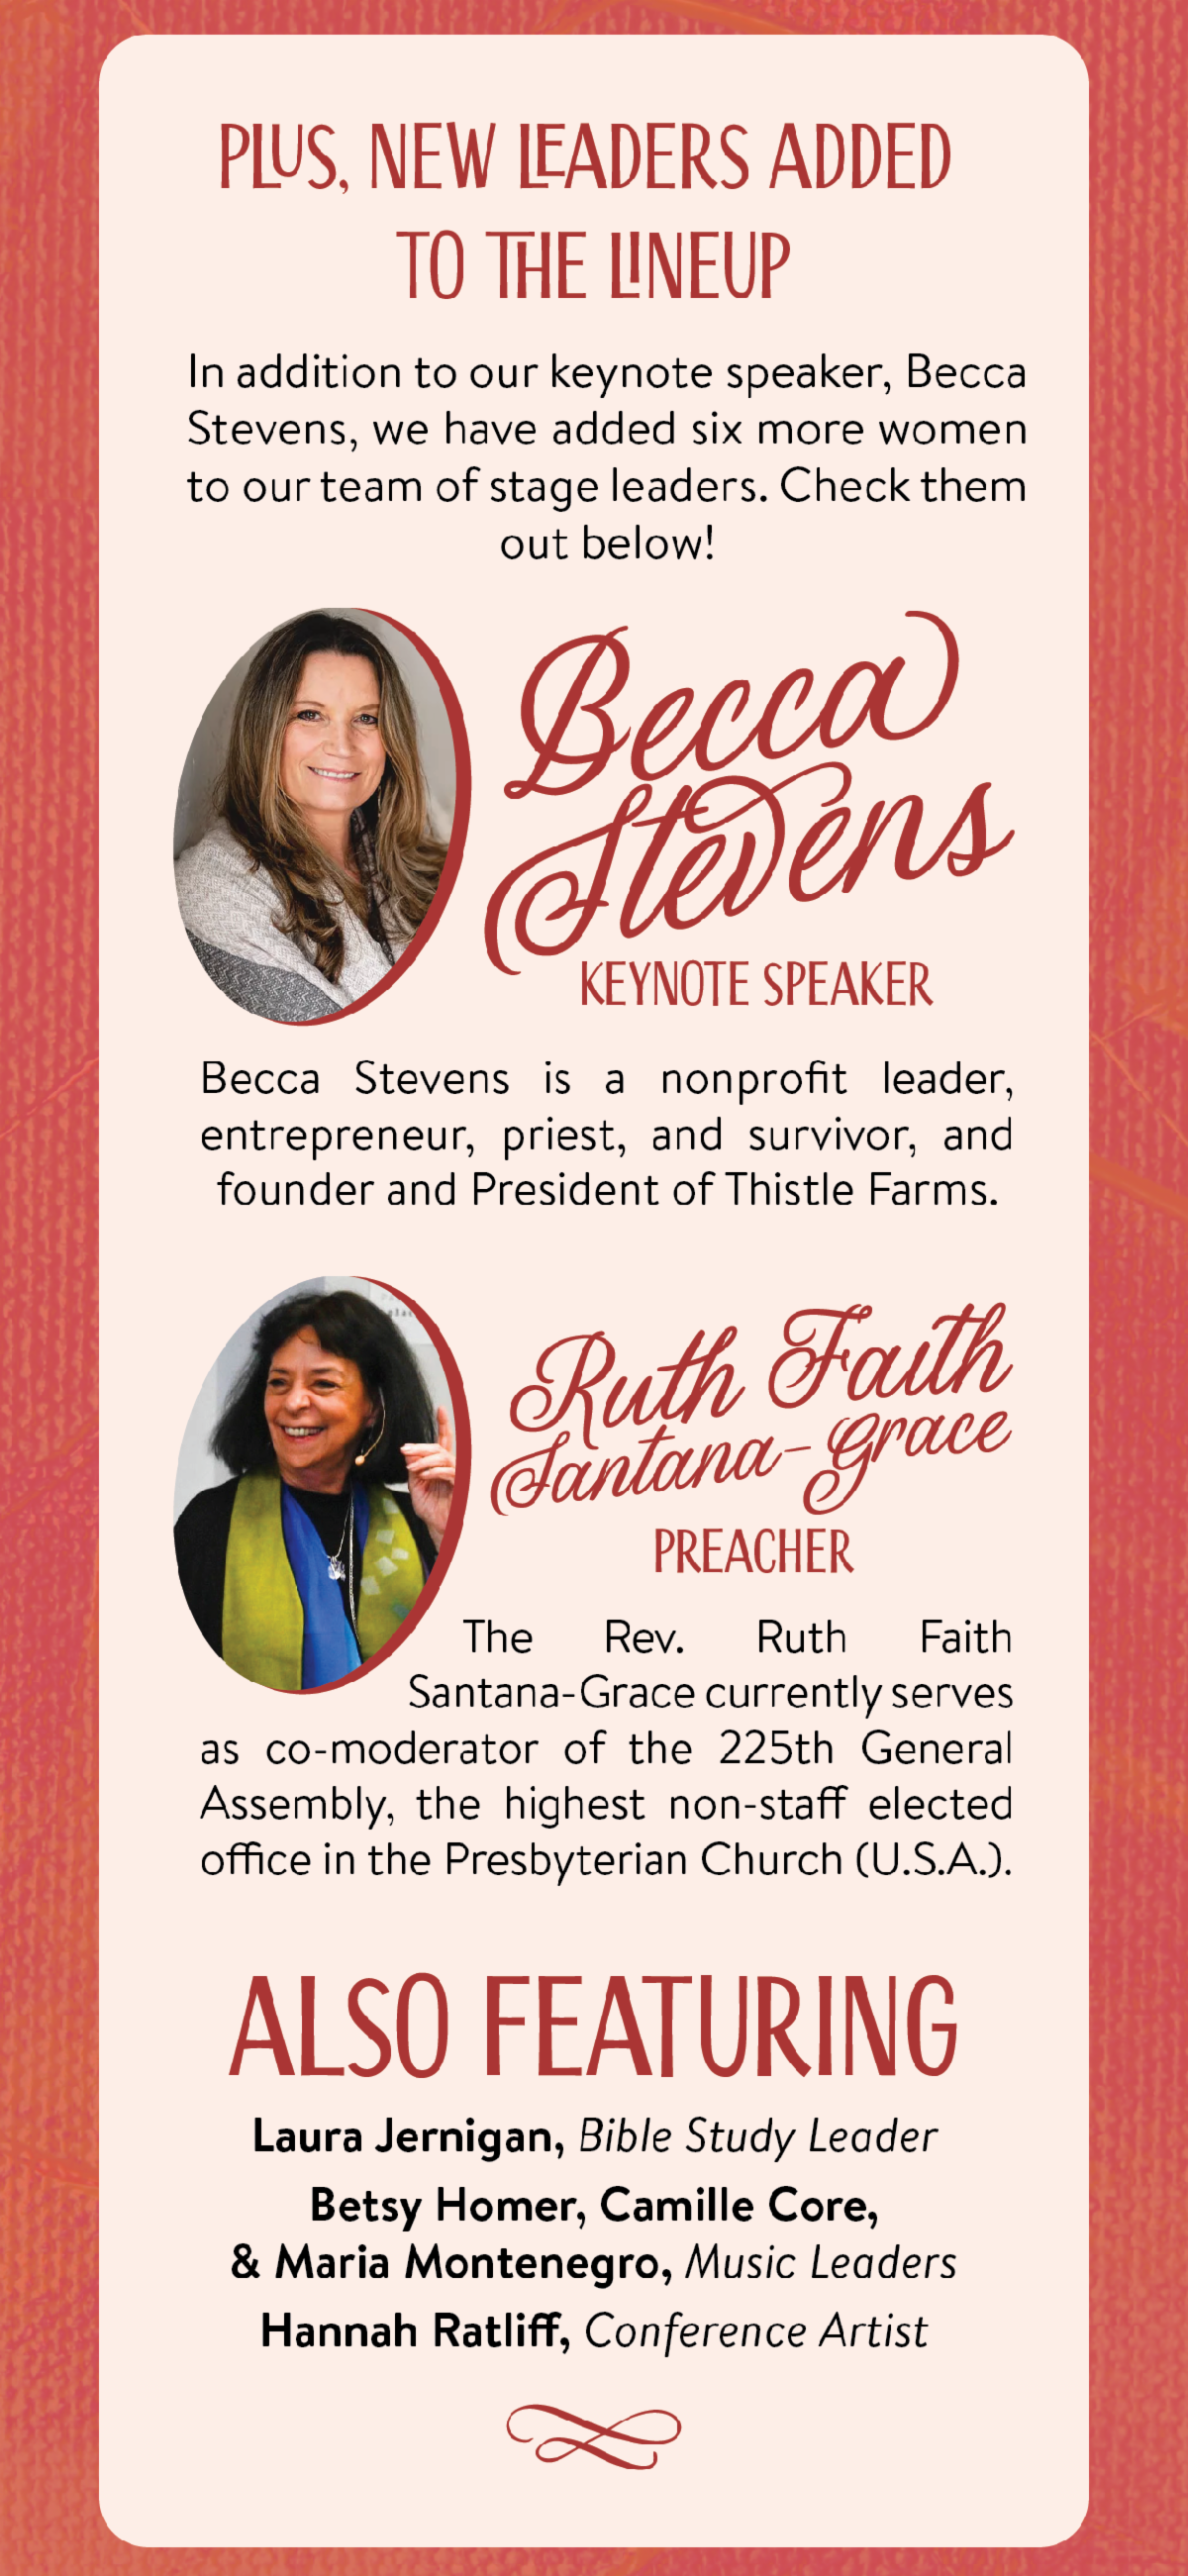 Plus, new leaders added to the lineup - In addition to our keynote speaker, Becca Stevens, we have added six more women to our team of stage leaders. Check them out below!  Becca Stevens, Keynote Speaker - Becca Stevens is a nonprofit leader, entrepreneur, priest, and survivor, and founder and President of Thistle Farms. Ruth Faith Santana-Grace, Preacher - The Rev. Ruth Faith Santana-Grace currently serves as co-moderator of the 225th General Assembly, the highest non-staff elected office in the Presbyterian Church (U.S.A.). Also featuring Laura Jernigan, Bible Study Leader, Betsy Homer, Camille Core, & Maria Montenegro, Music Leaders, and Hannah Ratliff, Conference Artist.